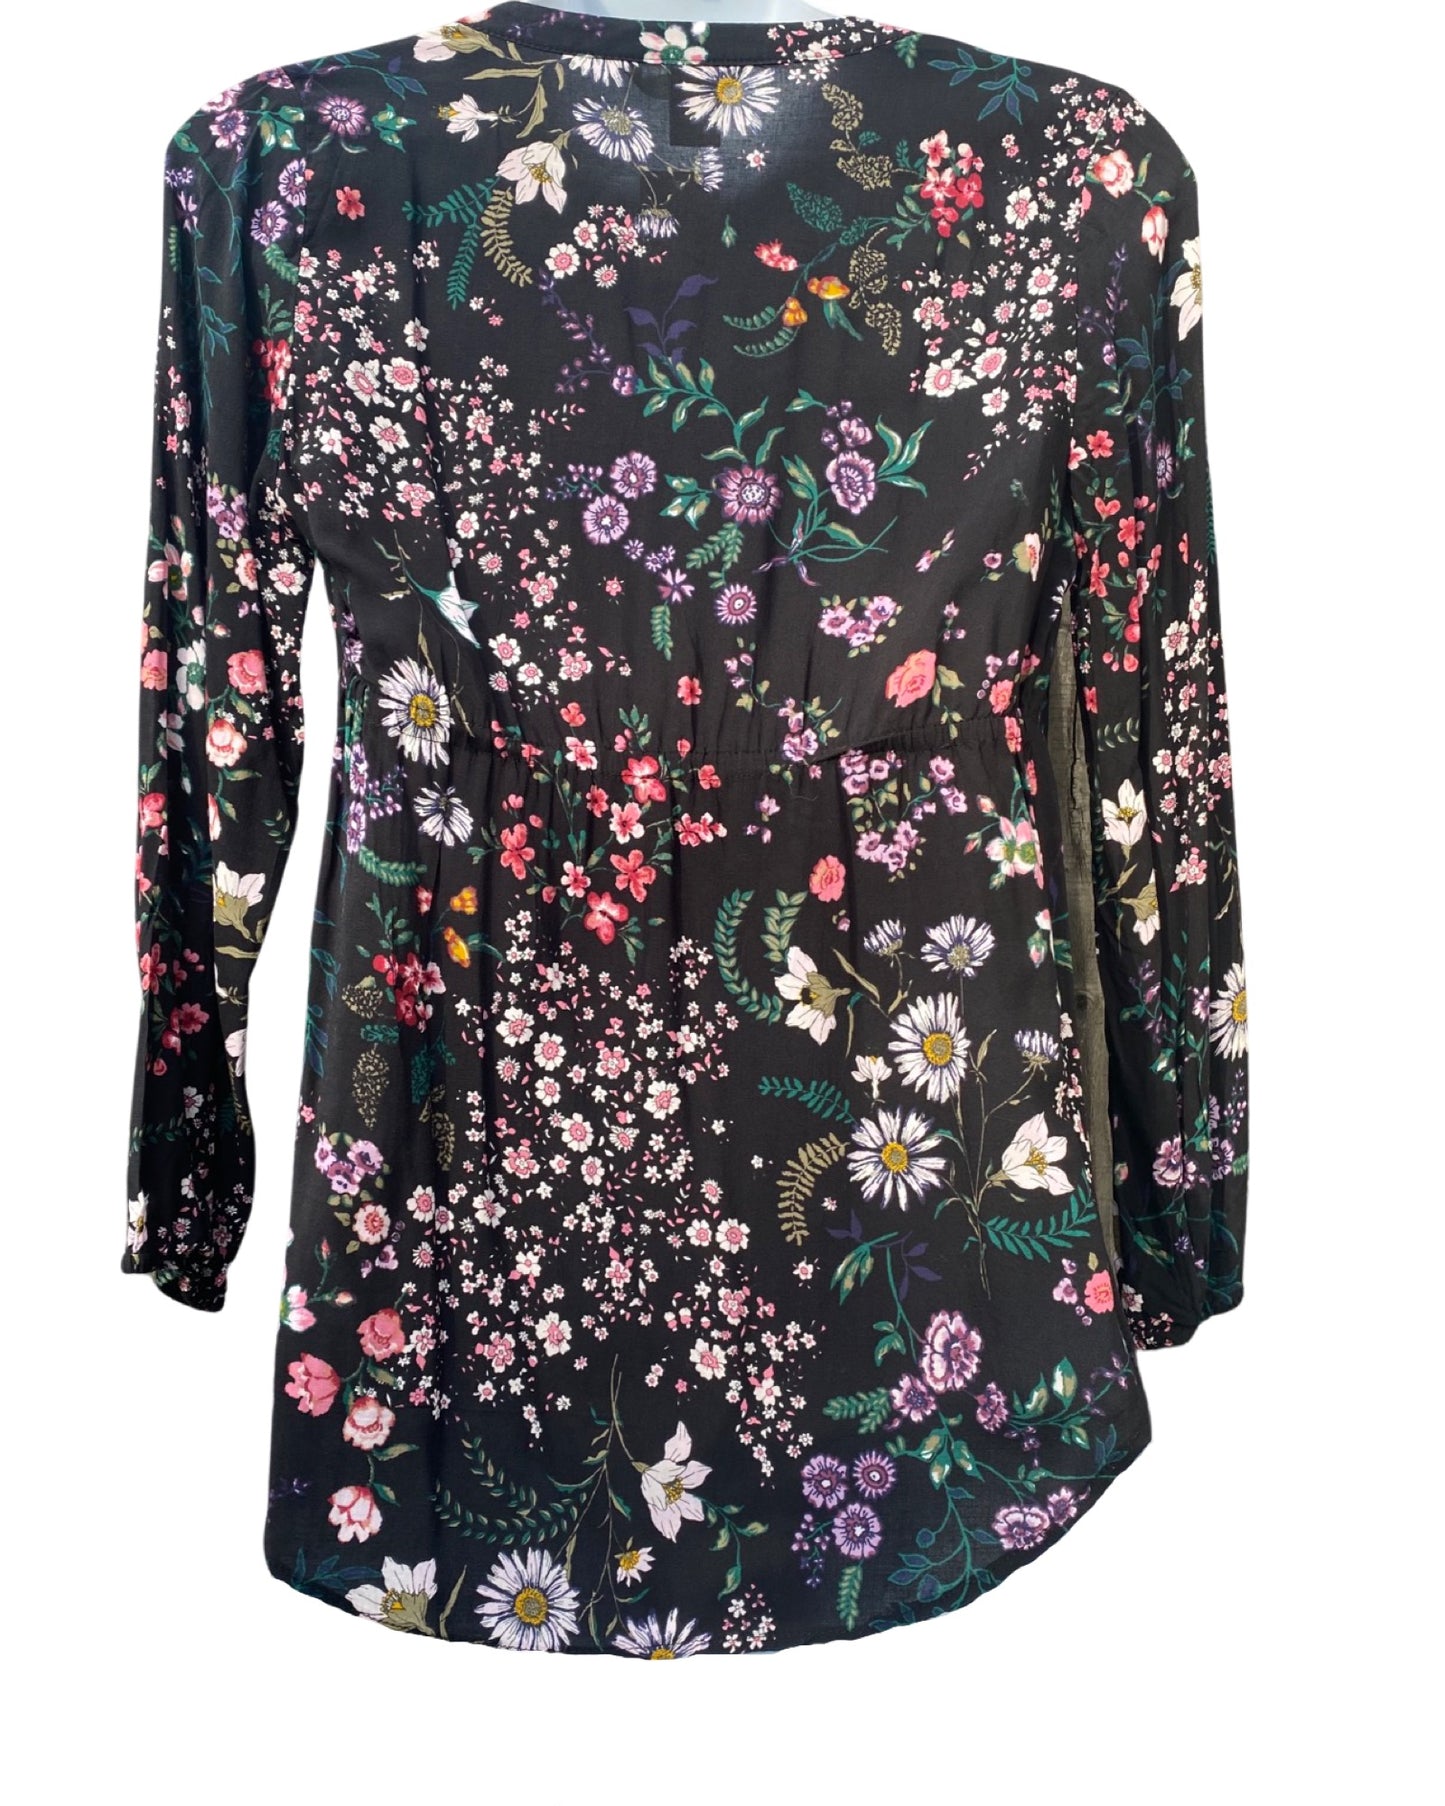 H&M Mama floral long sleeve blouse (size S)